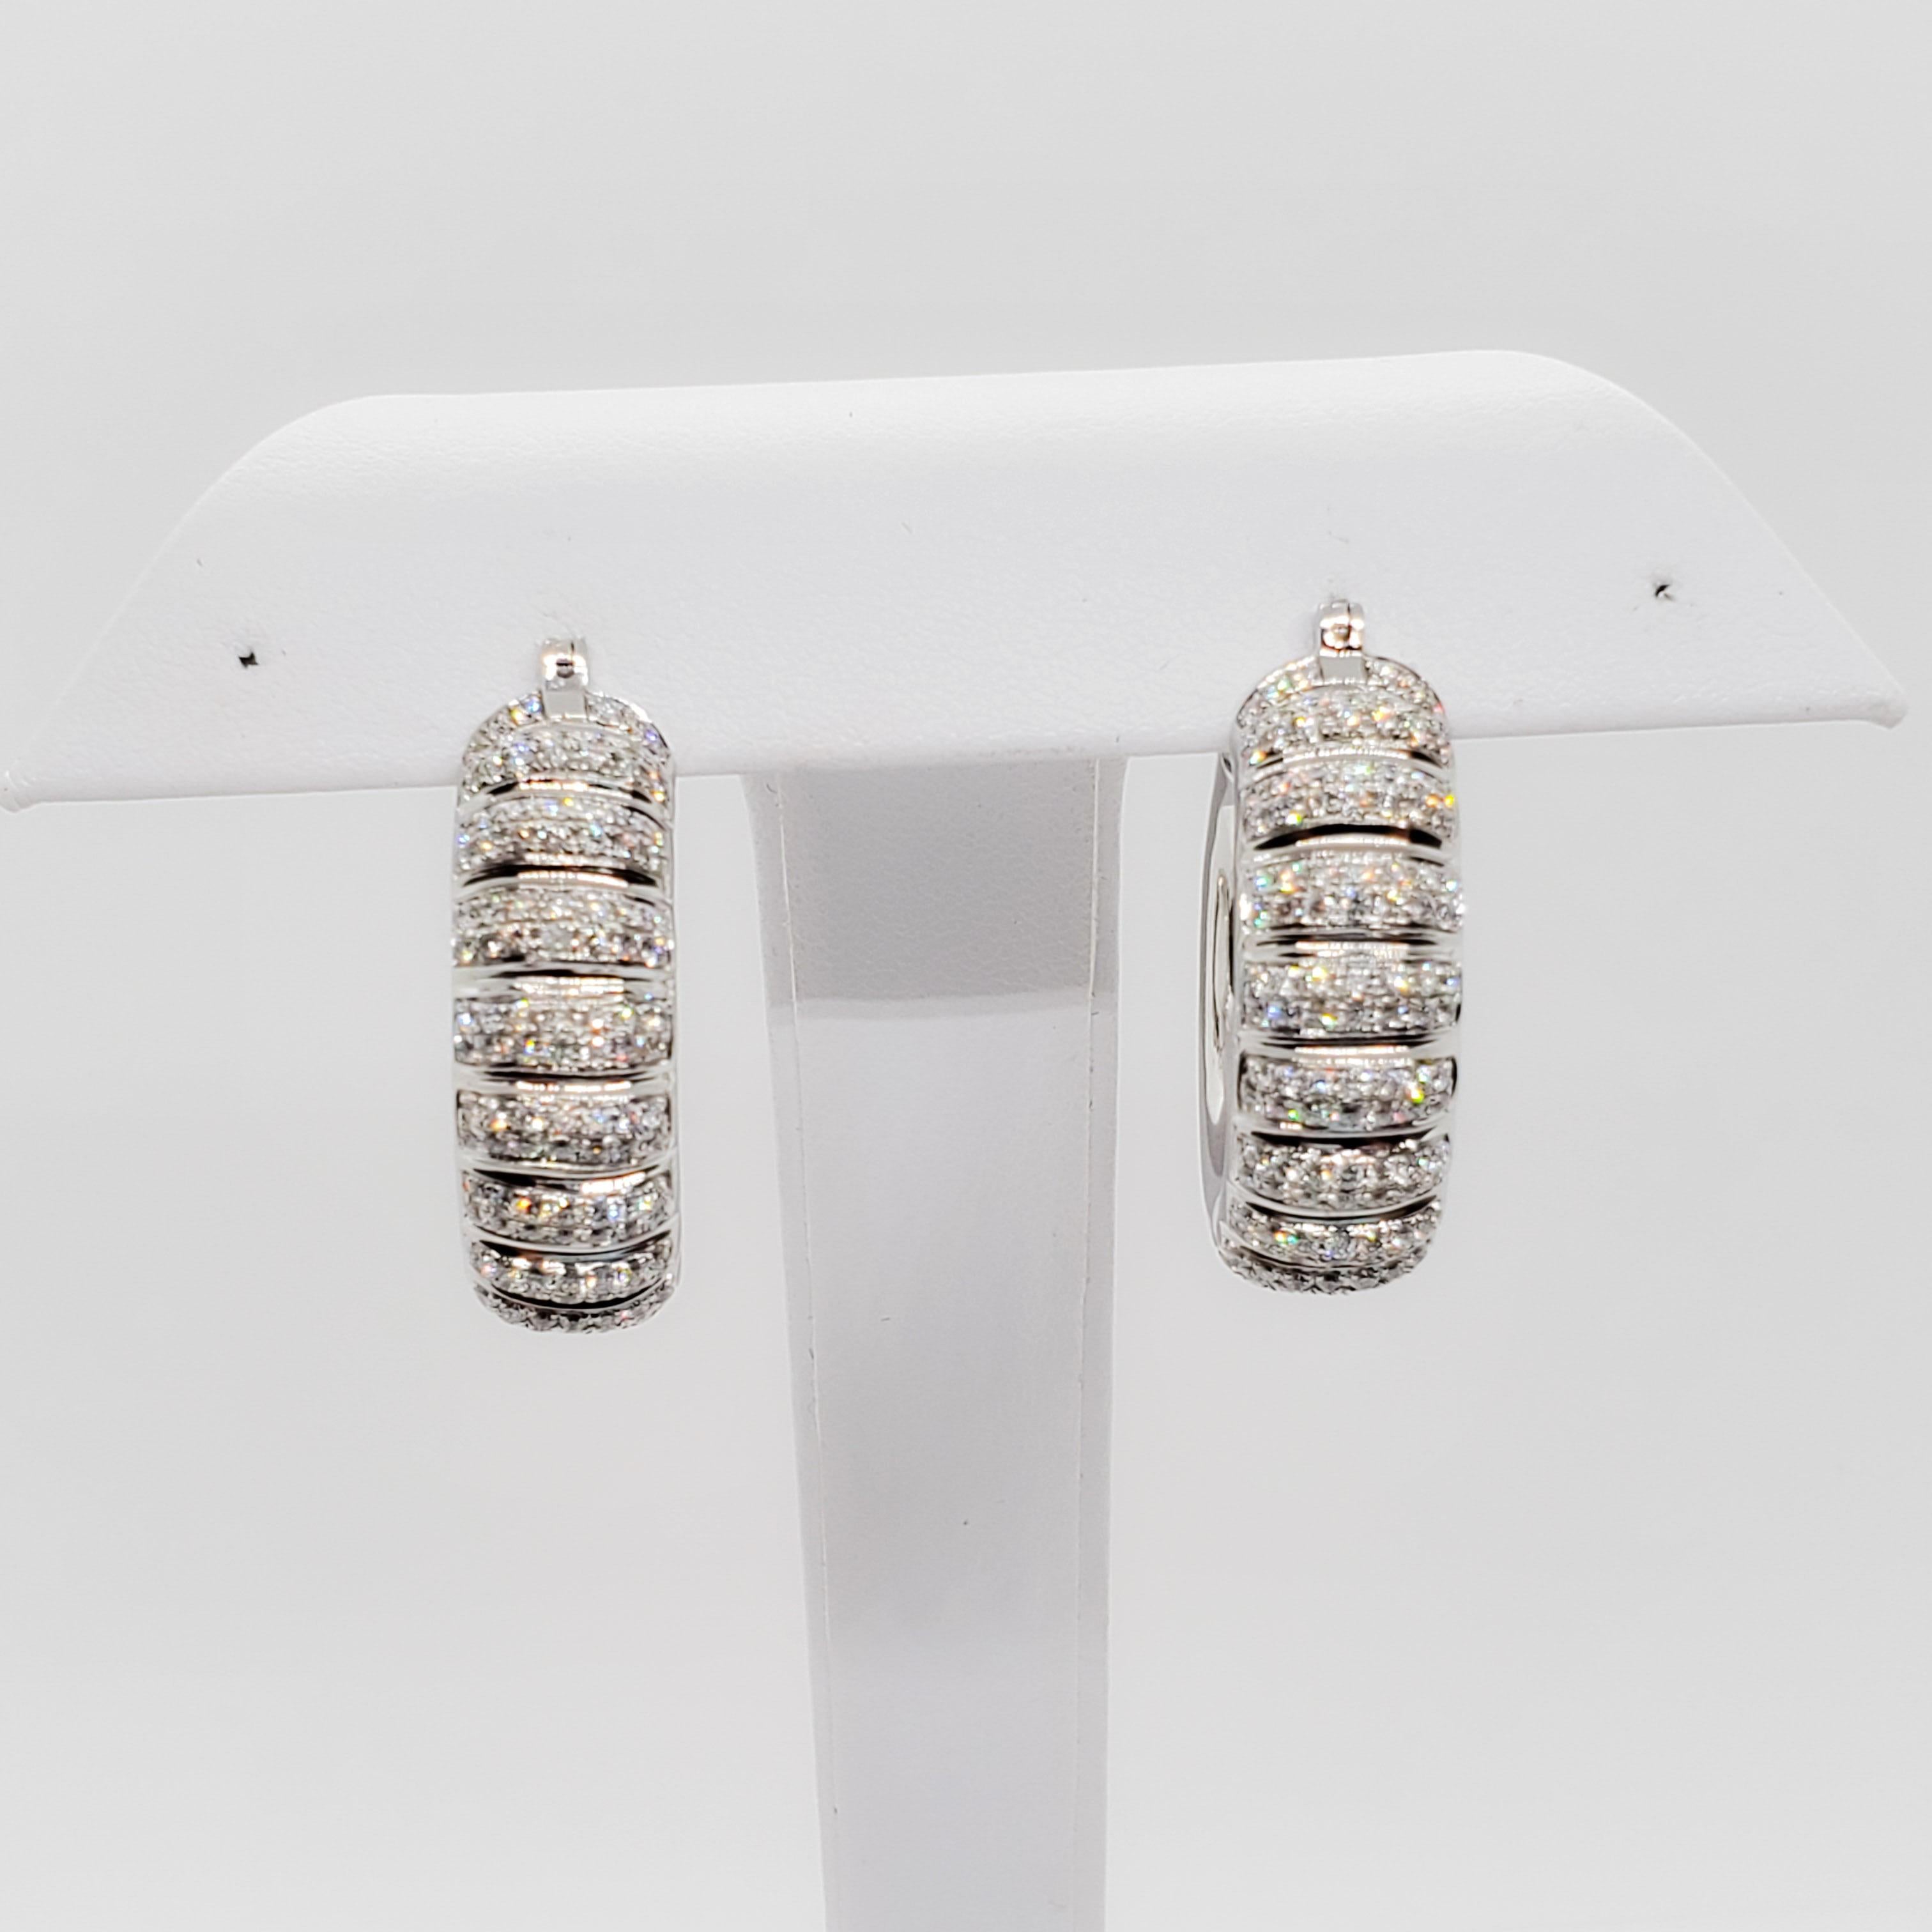 Beautiful diamond hoops with 3 carats of good quality, white, and bright diamonds in handmade 18k white gold mountings.  These earrings are chunky and fun.  Perfect for day or night, making them so versatile and easy to wear.  Excellent condition.